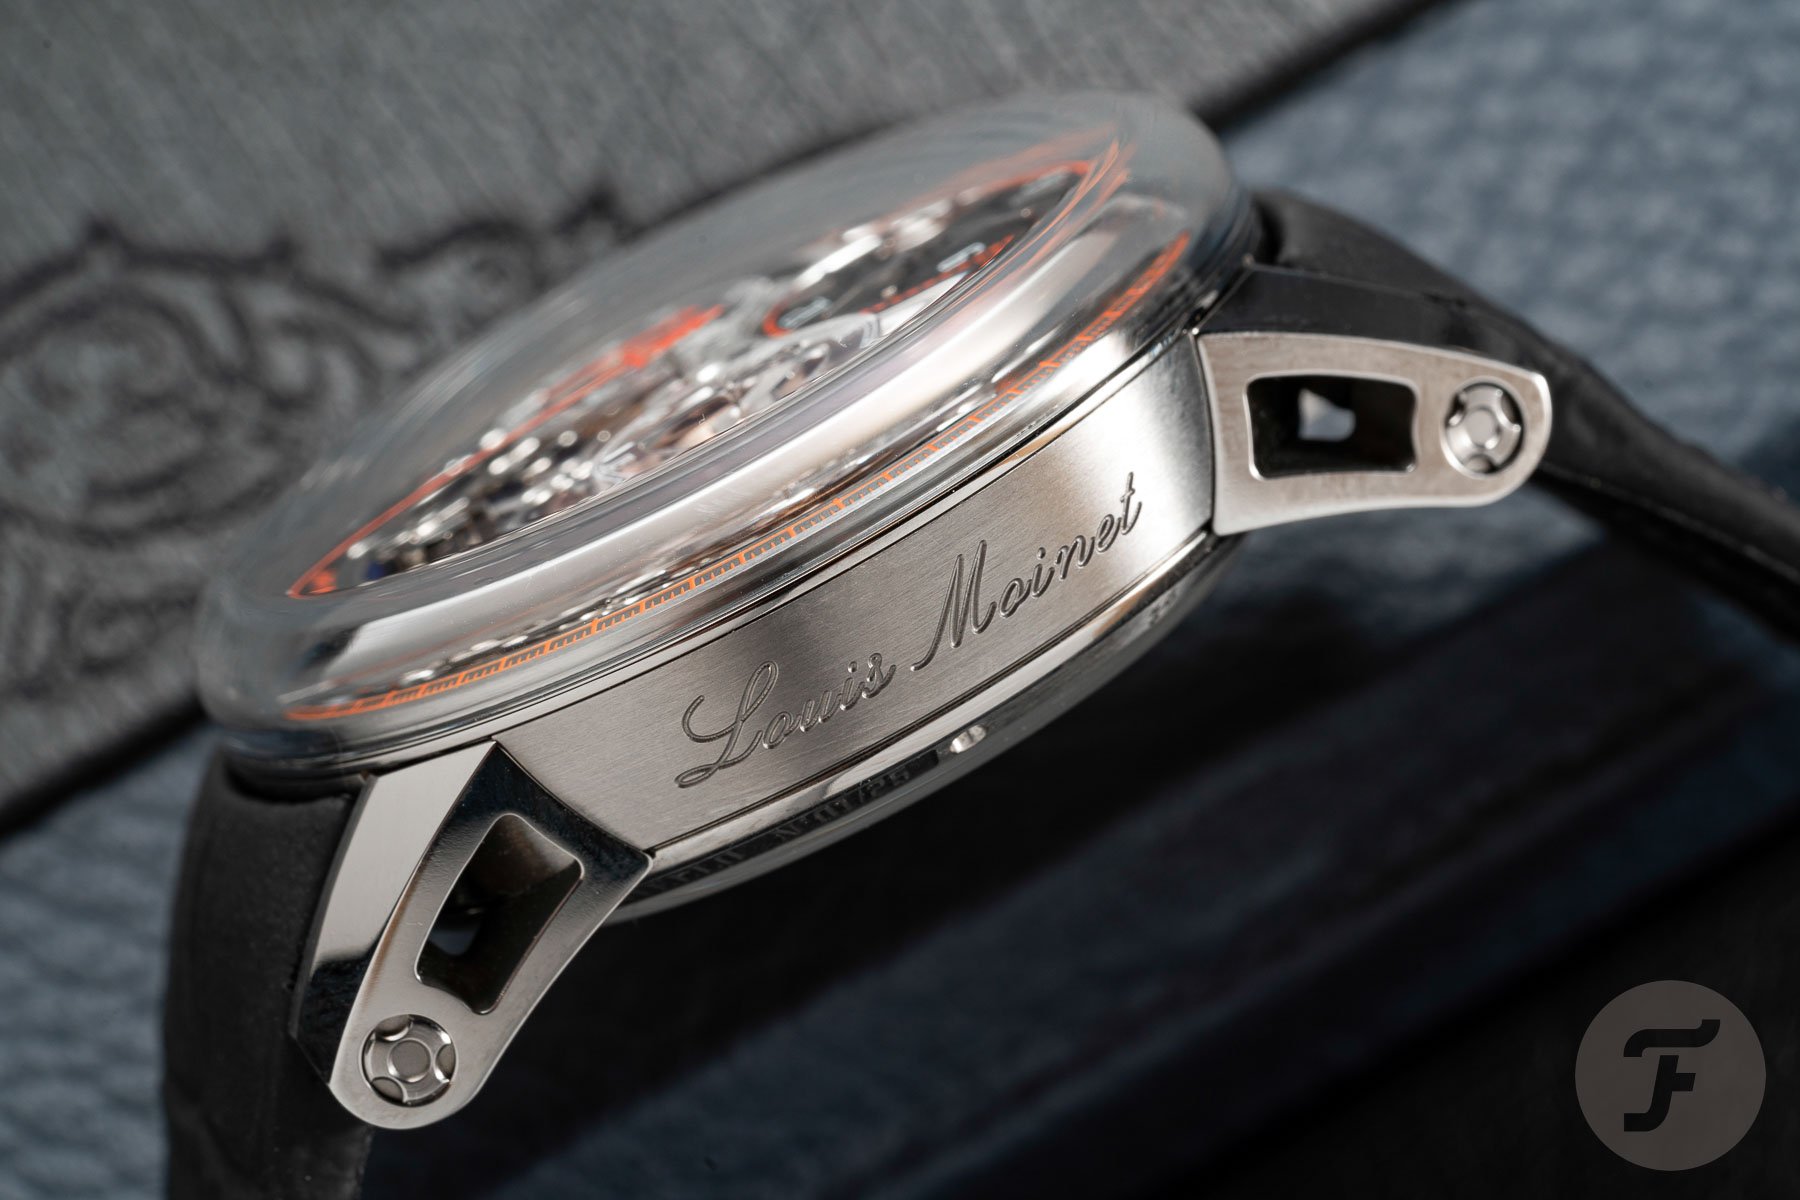 INTERVIEW: The Louis Moinet Space Revolution Watch & Wearable Art